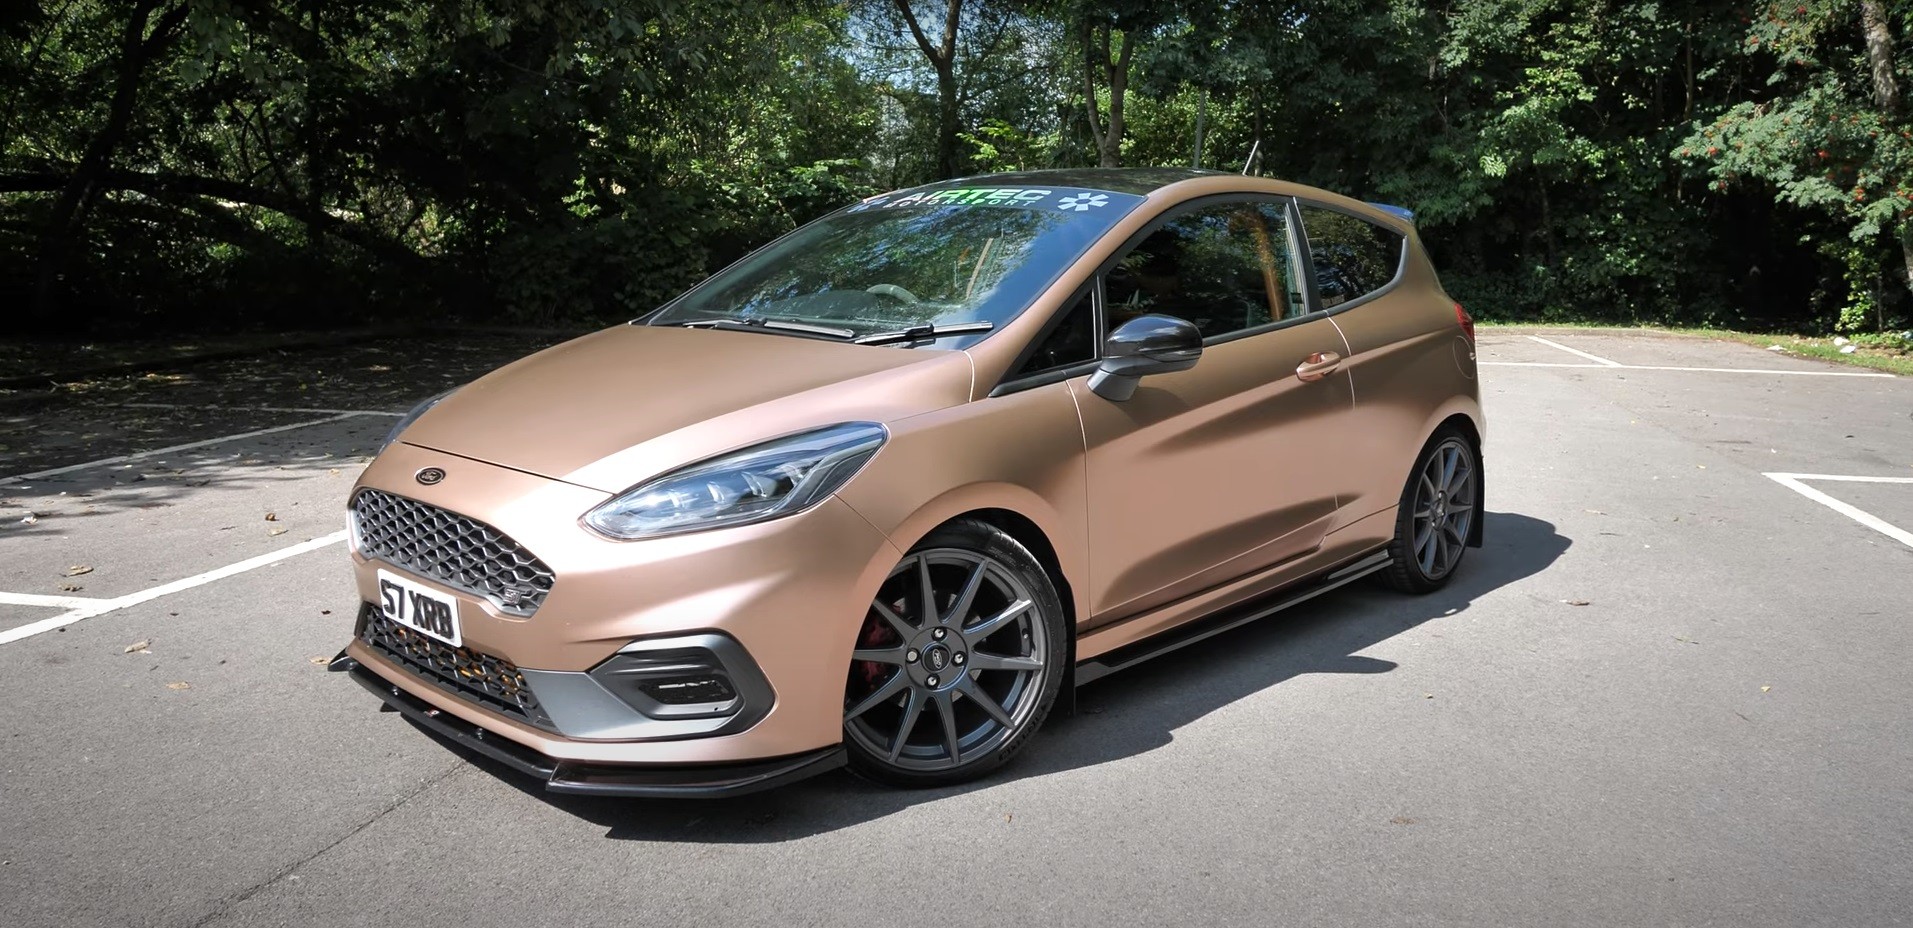 Rachel's Stage 2 Ford Fiesta ST Is Quick, Loud, and of Course